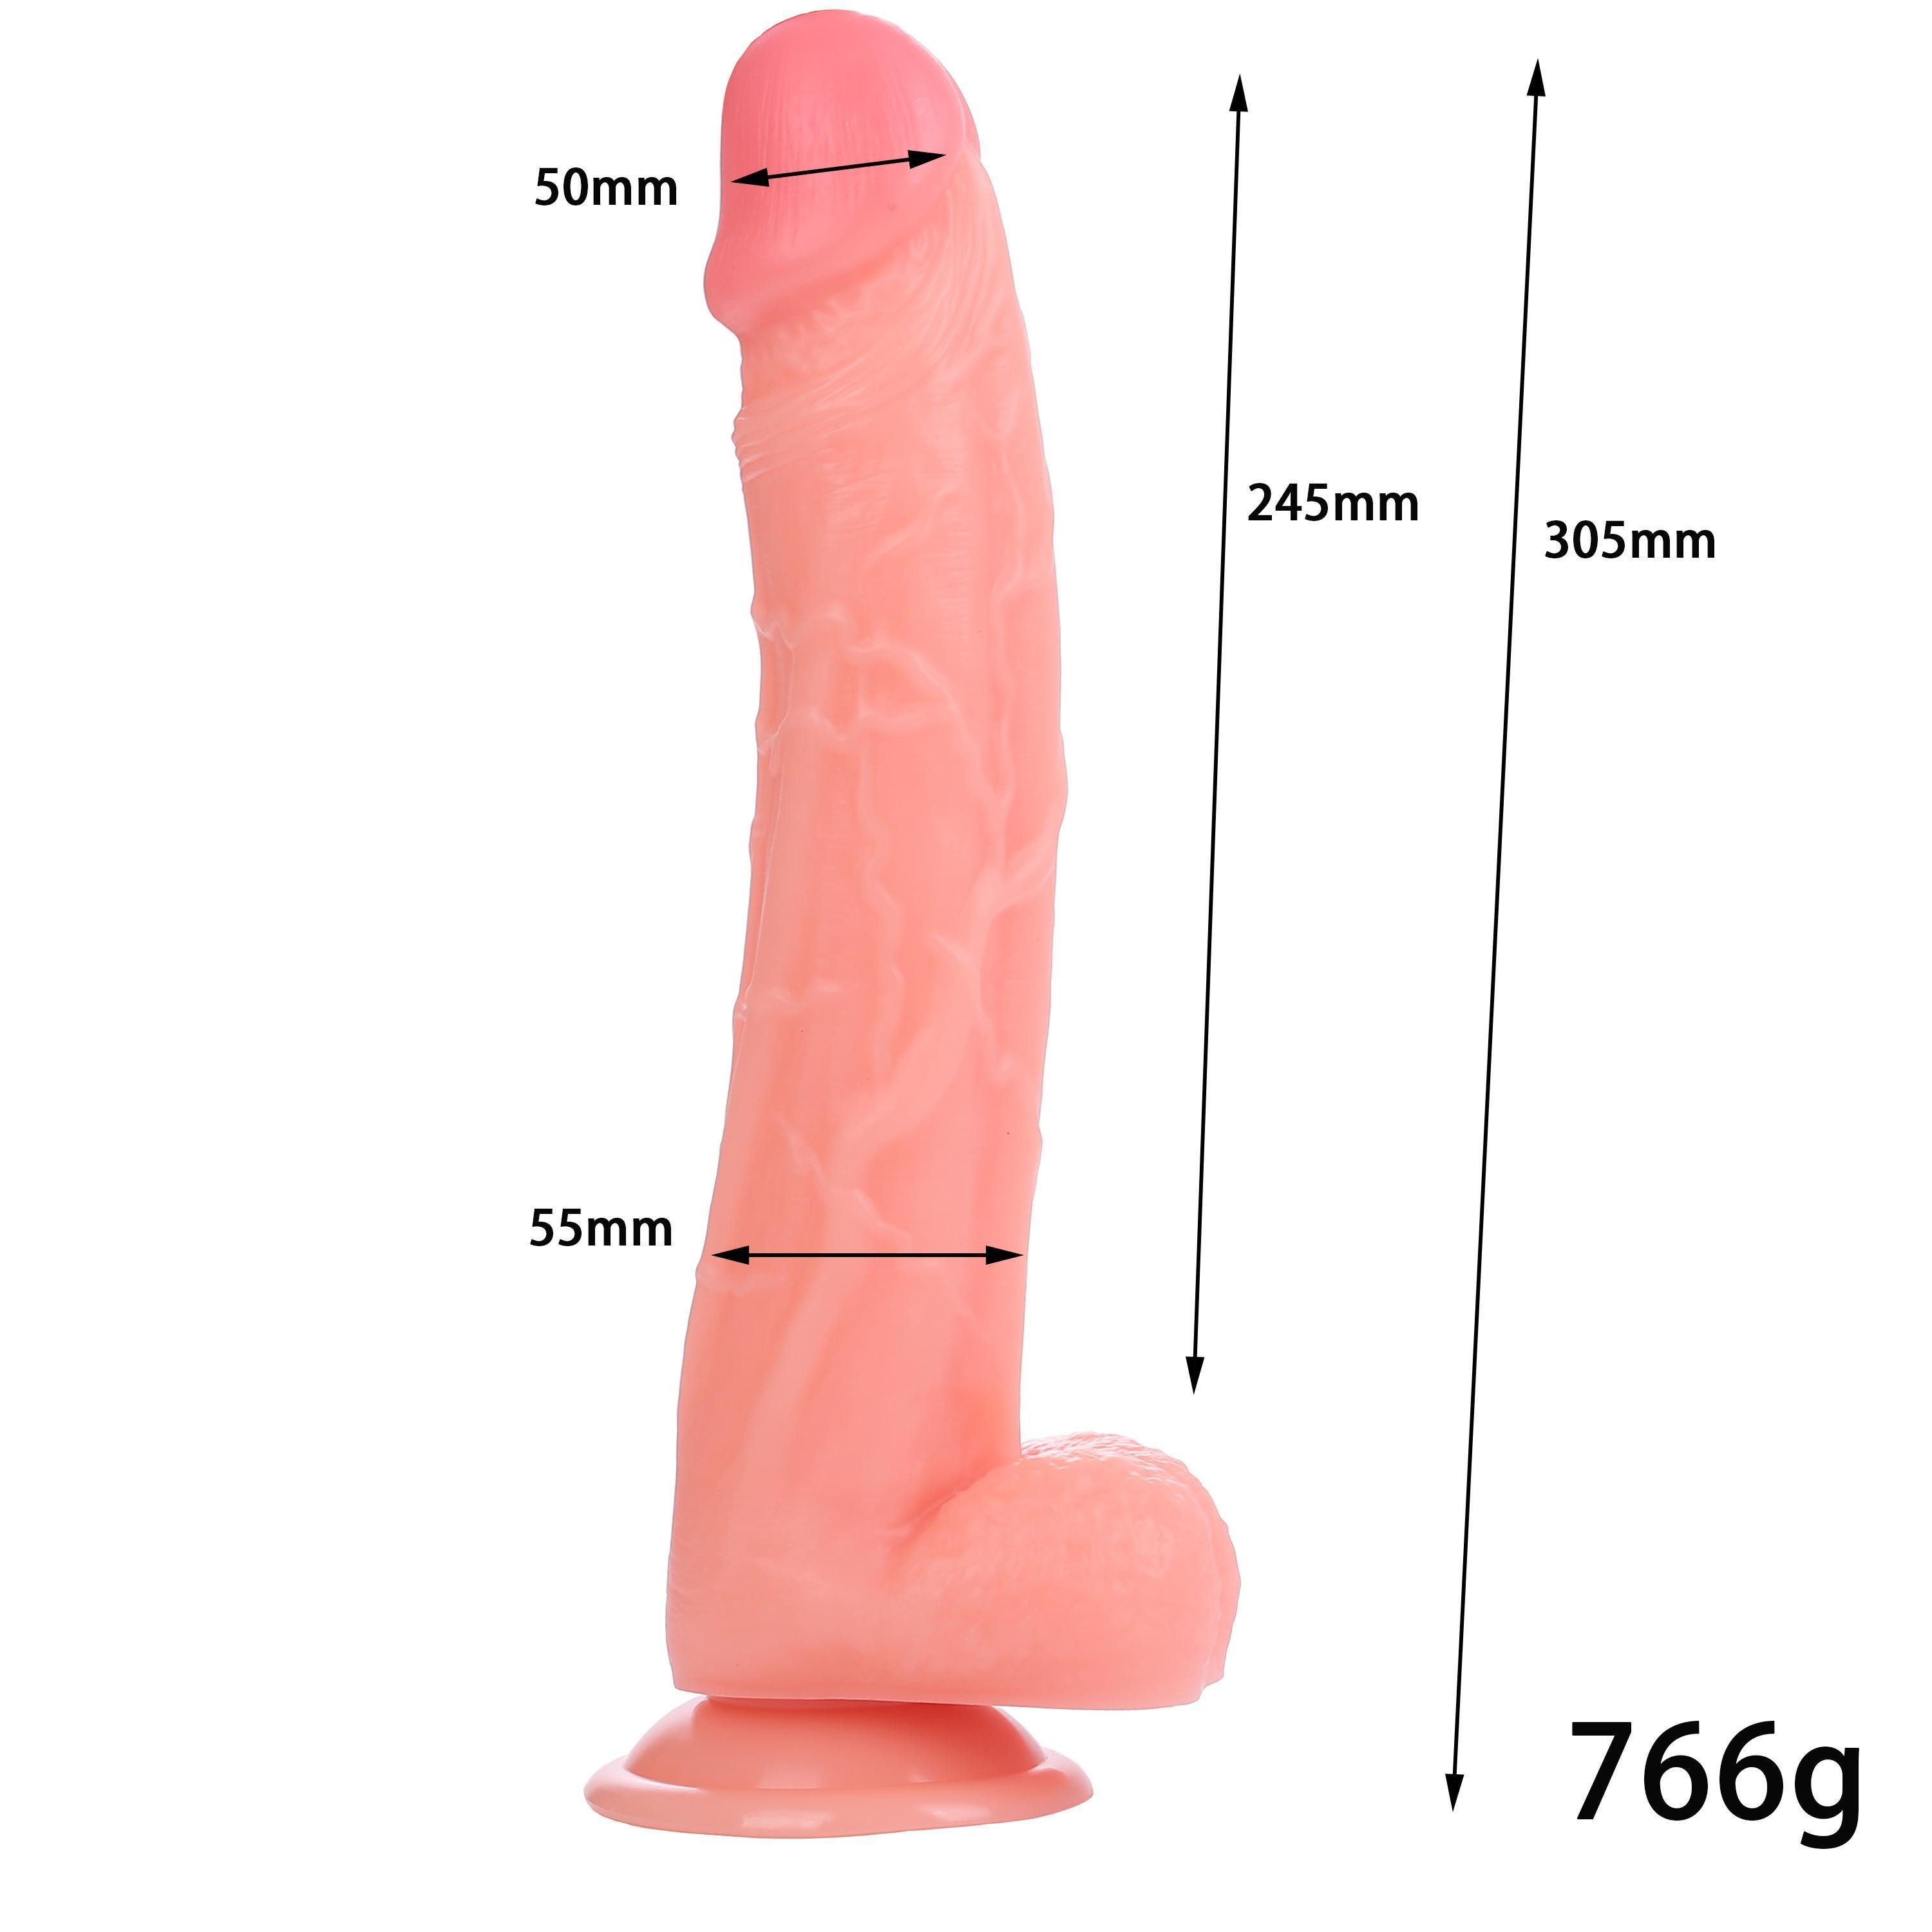 Simulated Penile Female Appliance Soft Touch False Penile Female Adult Appliance Dildo wl293